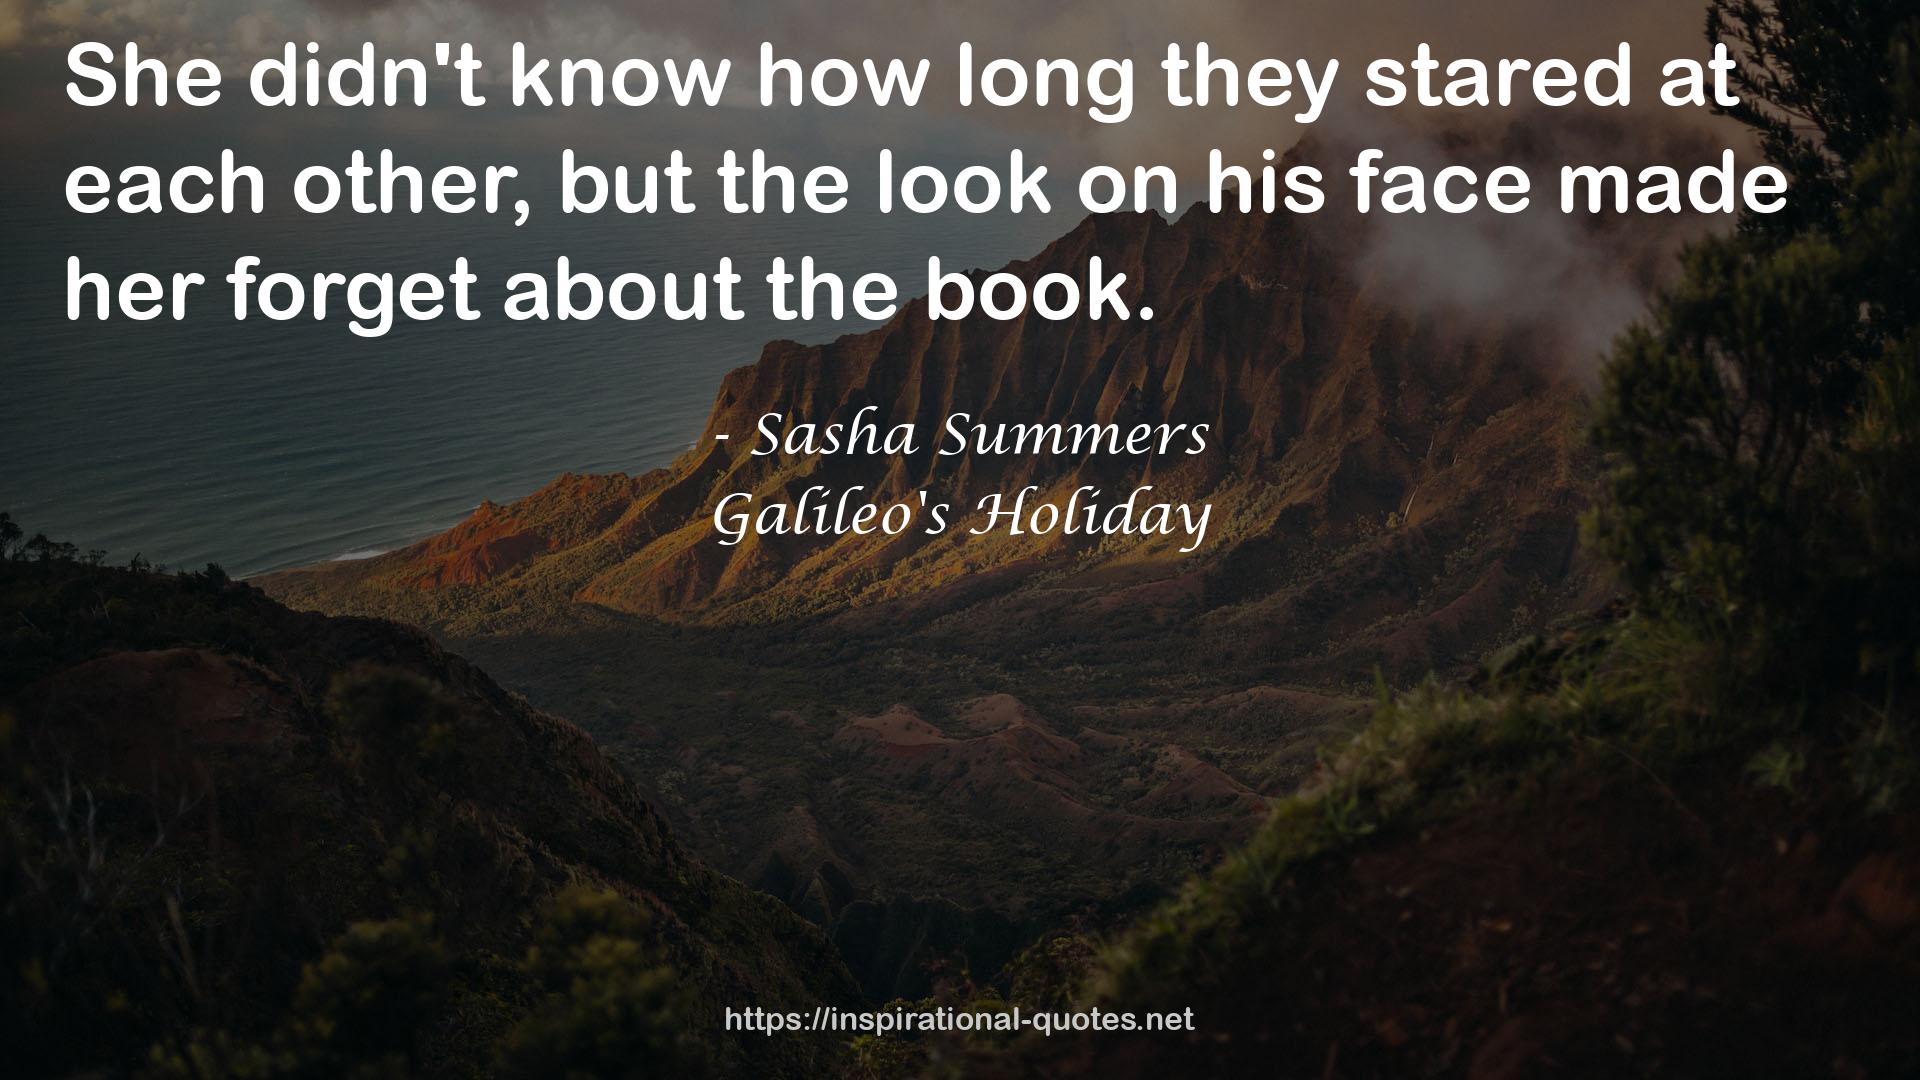 Galileo's Holiday QUOTES